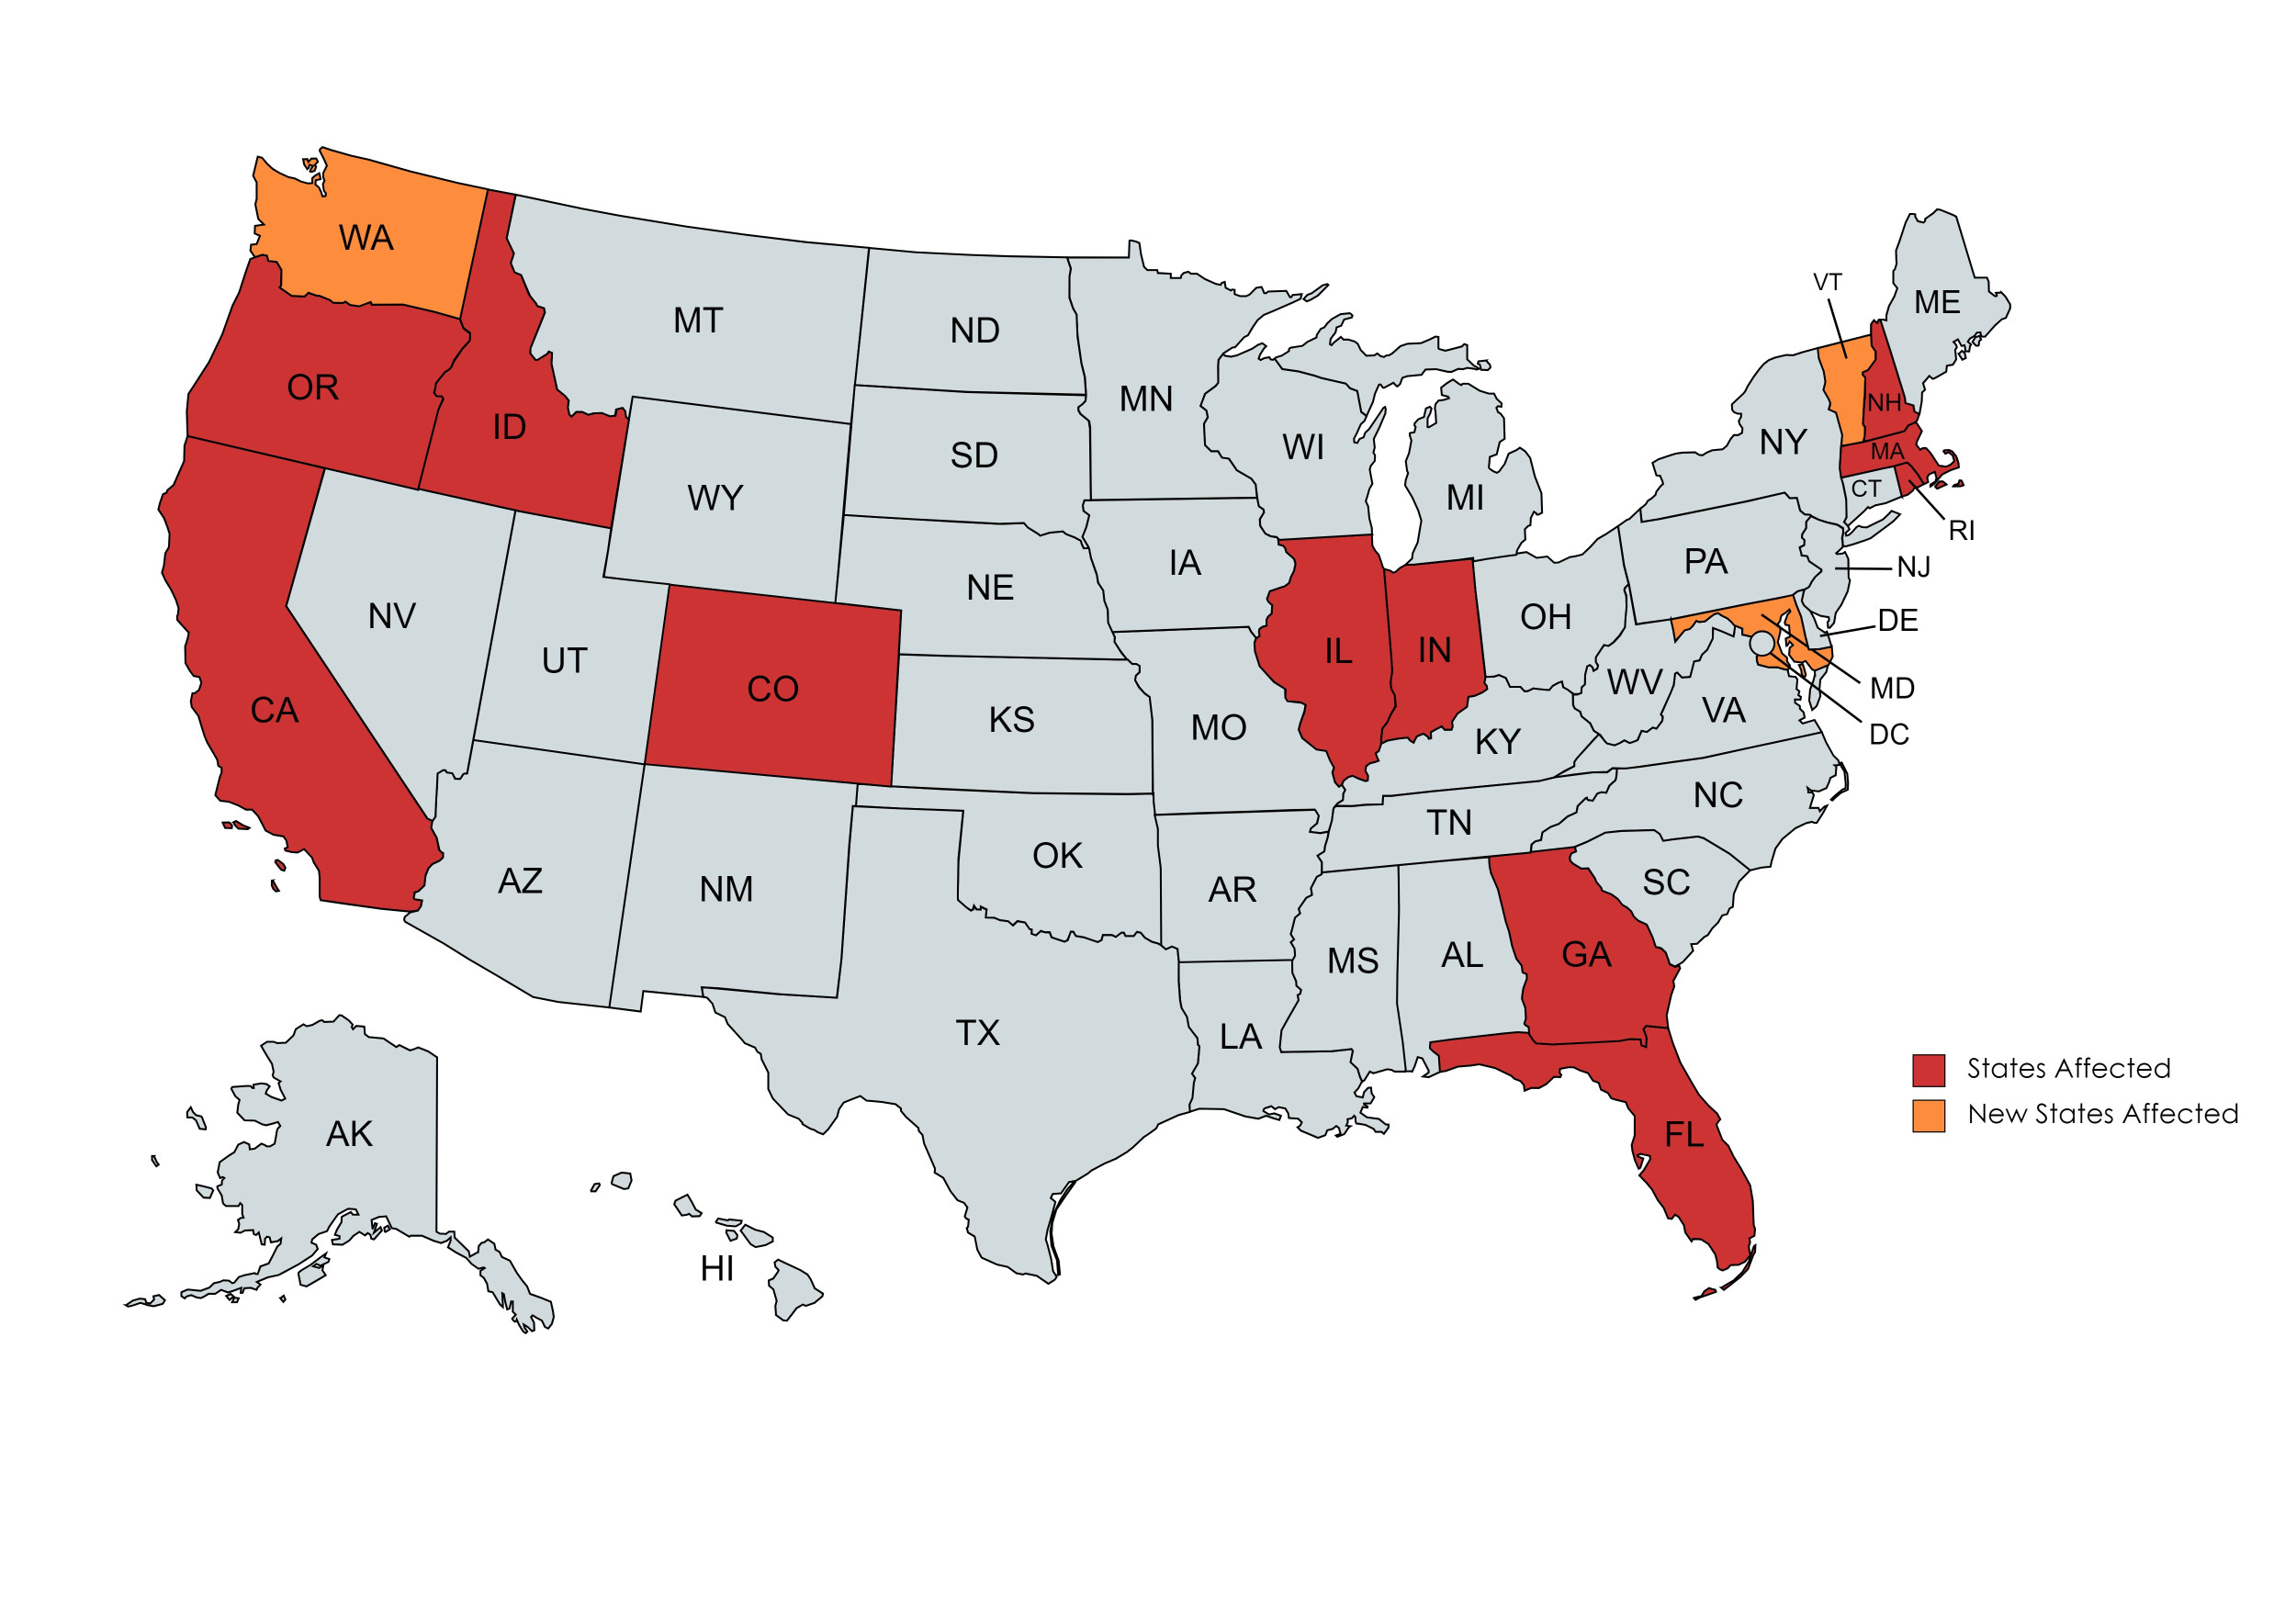 The canine respiratory illness map exhibits 14 affected states